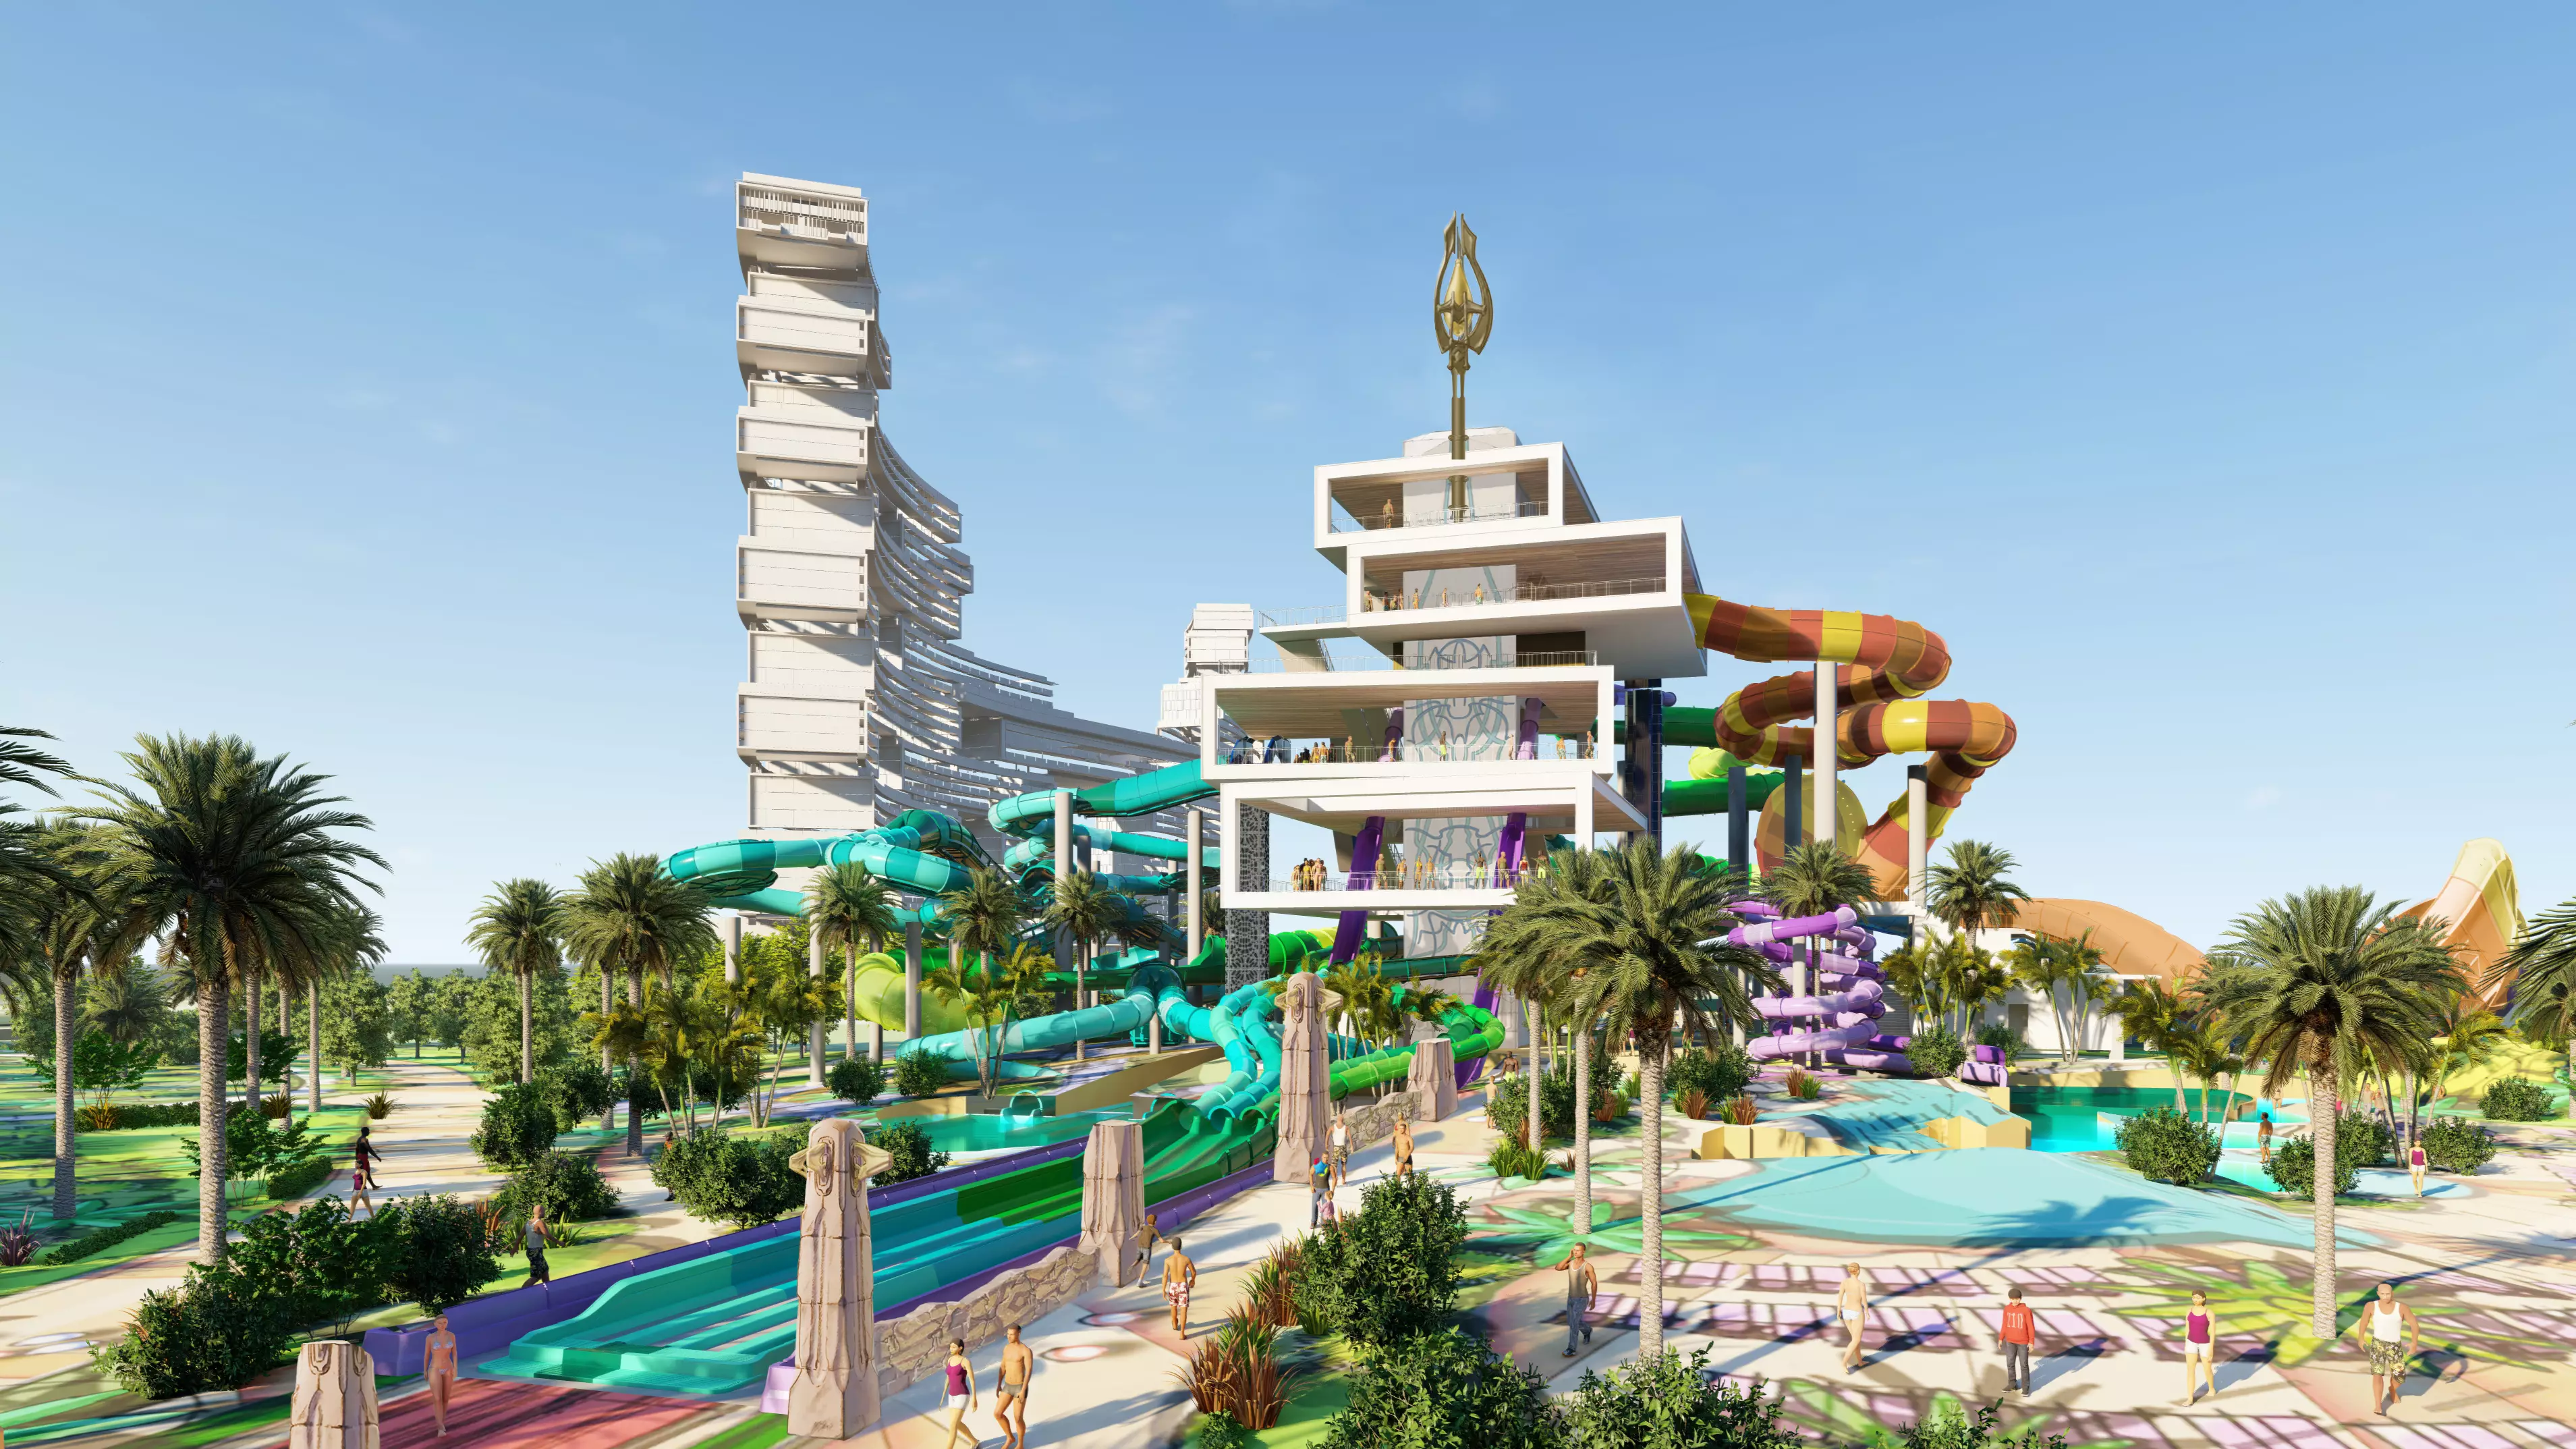 A Dubai Water Park Is Set To Become One Of The Biggest In The World With A 112ft Tower And 12 Slides